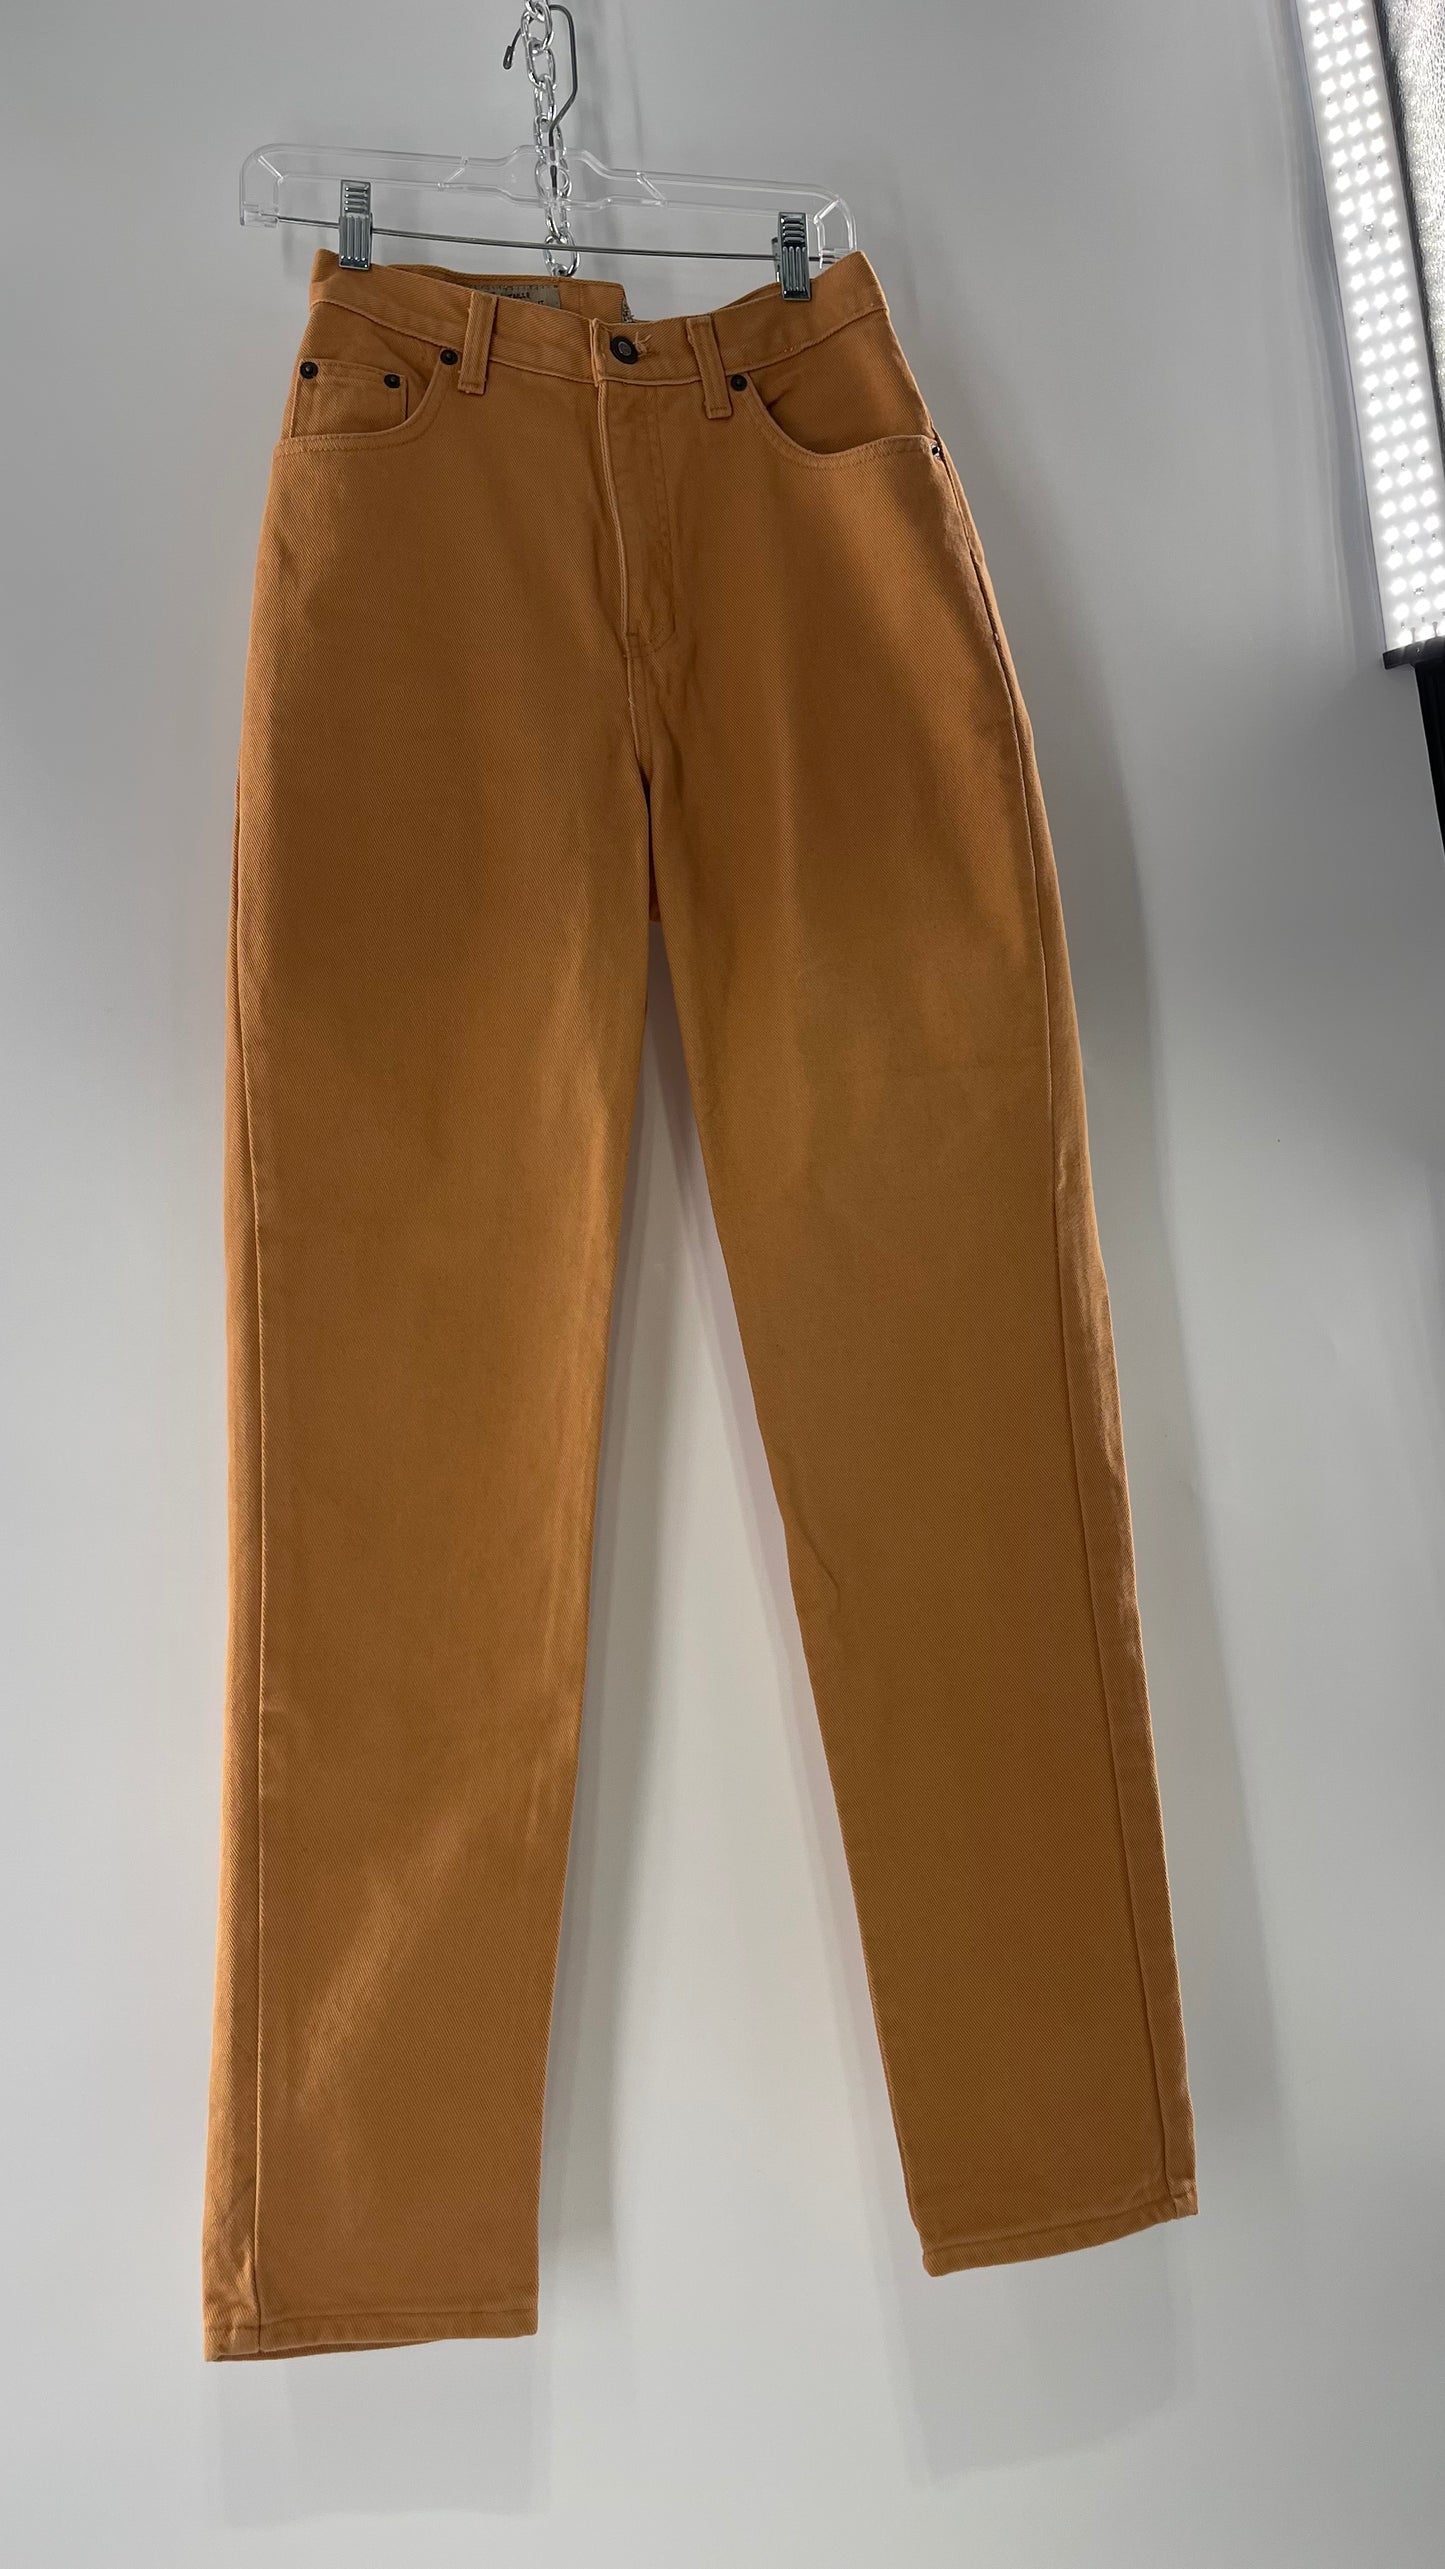 Vintage Mustard/Orange Express Ultra High Waisted Jeans with Old School Jacron (7/8)